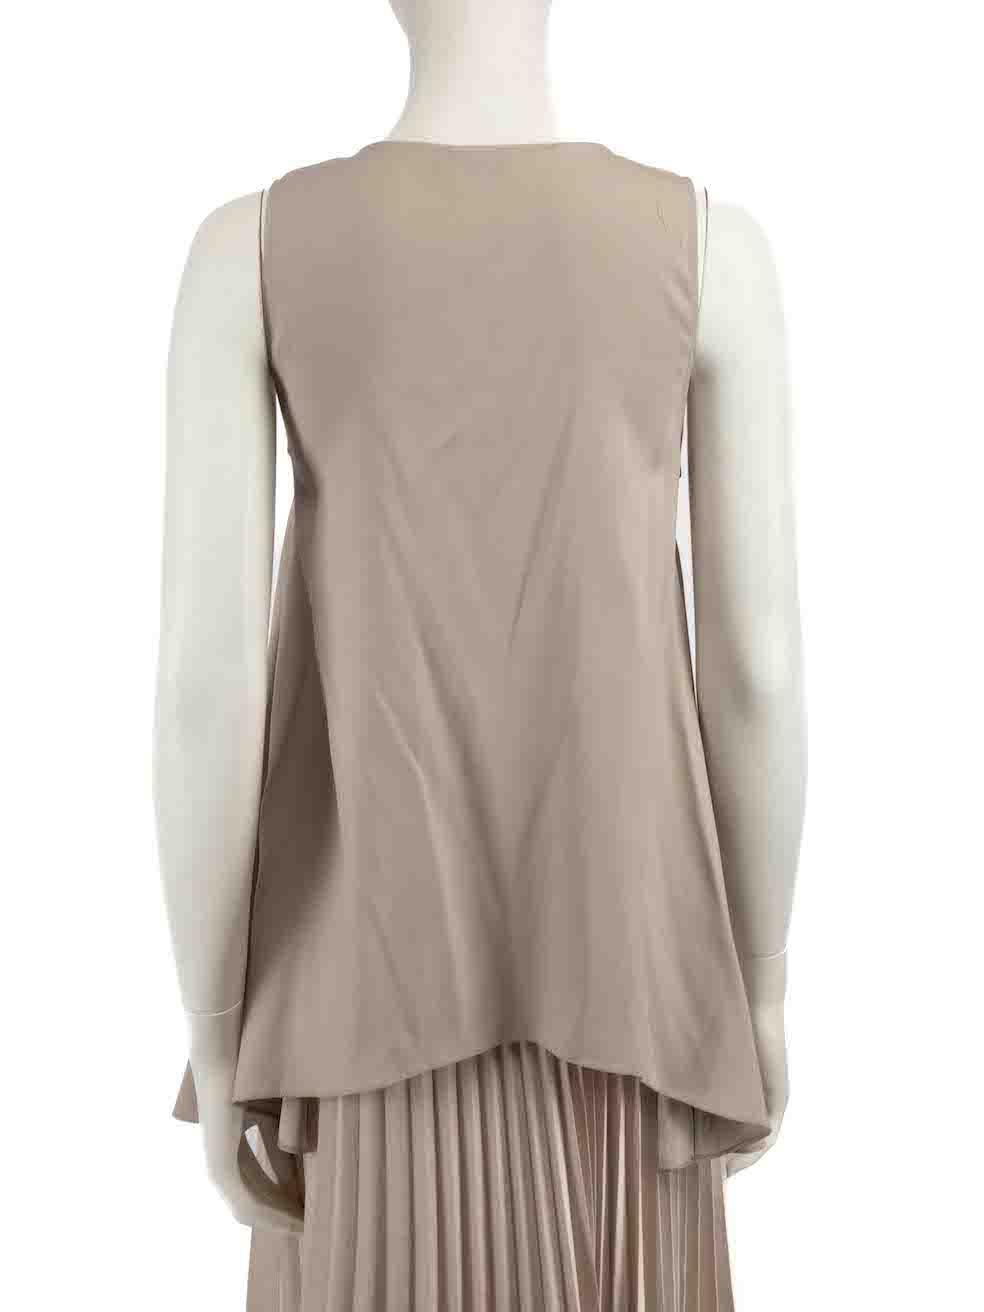 Brunello Cucinelli Beige Silk Tank Top Size S In Good Condition For Sale In London, GB